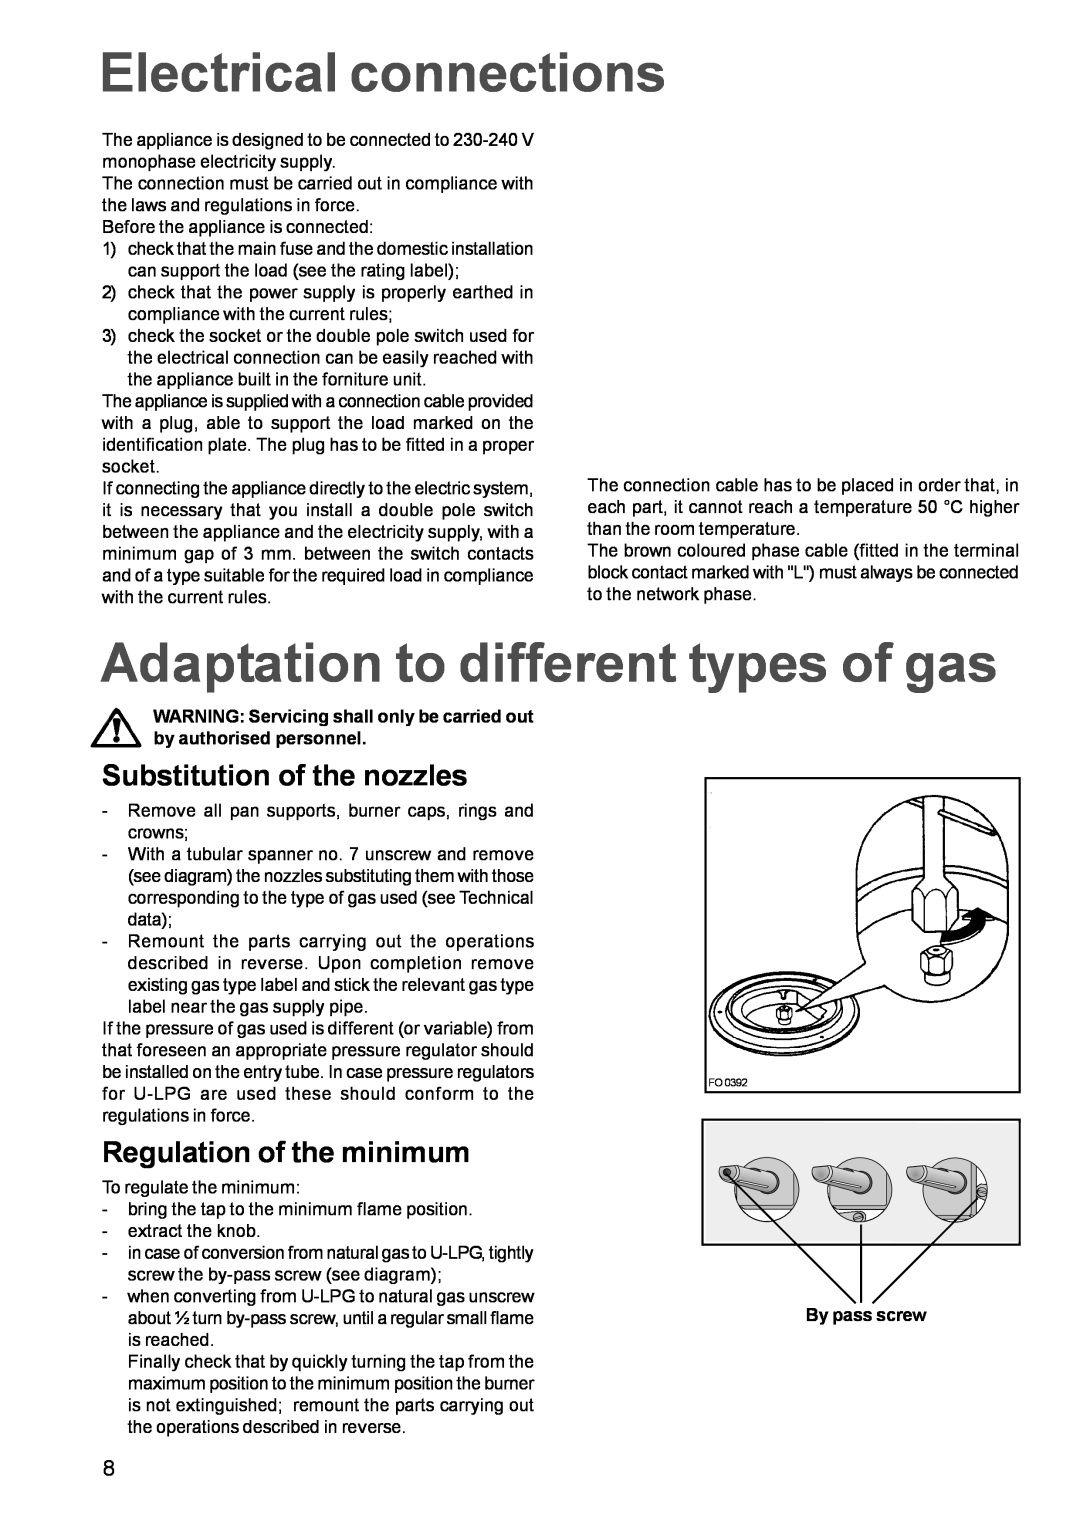 Zanussi ZGF 681 manual Electrical connections, Adaptation to different types of gas, Substitution of the nozzles 